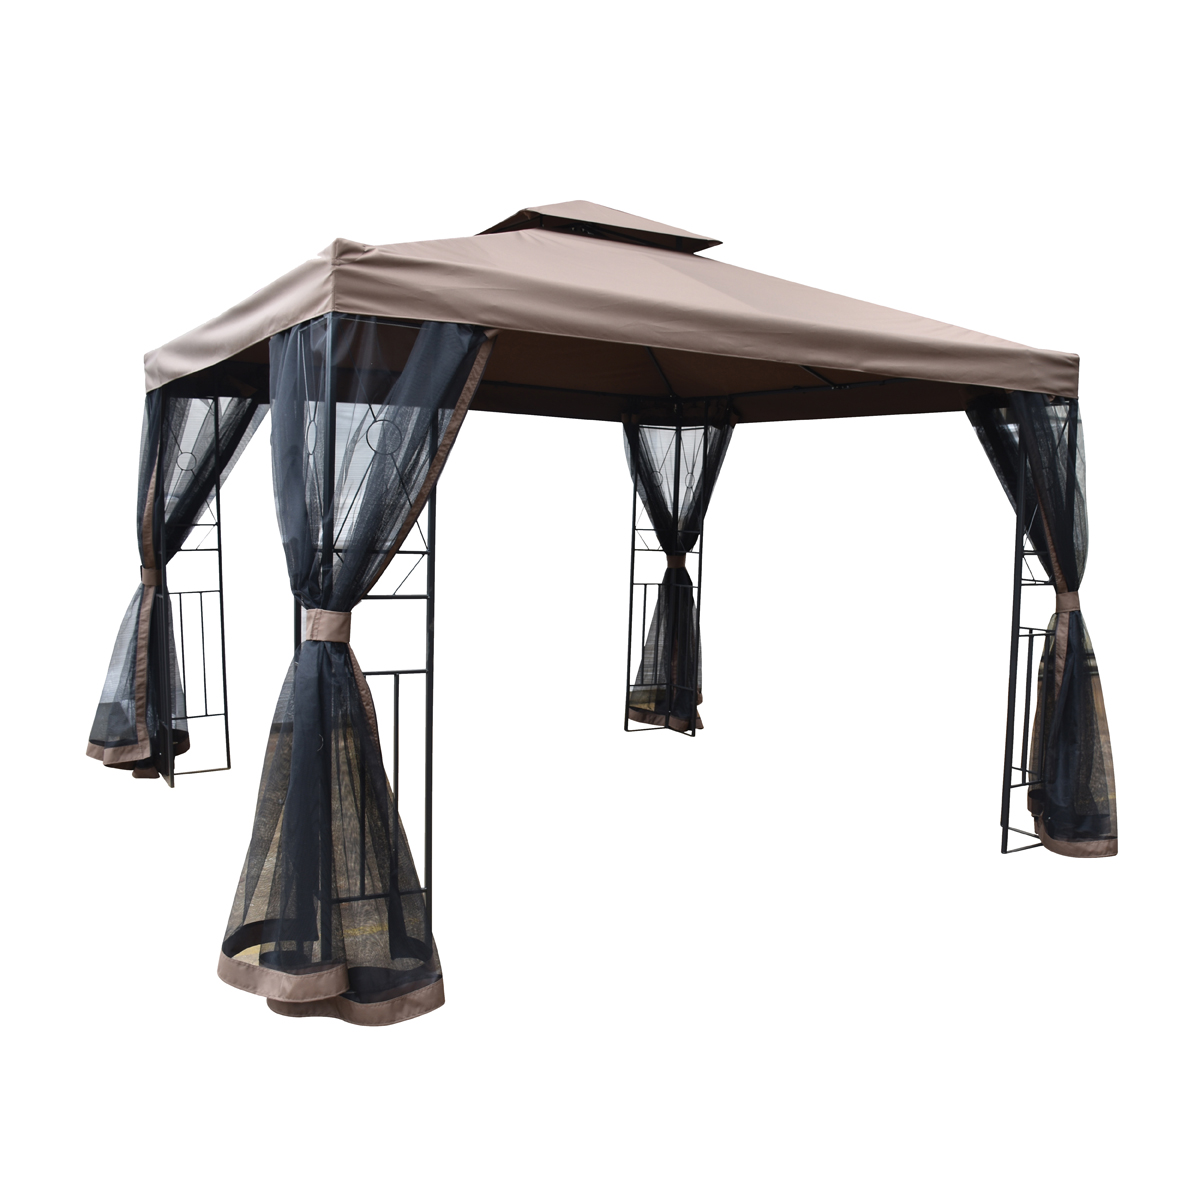 Gazebo with Netting, 118 in W Exterior, 118 in D Exterior, 105.51 in H Exterior, Square